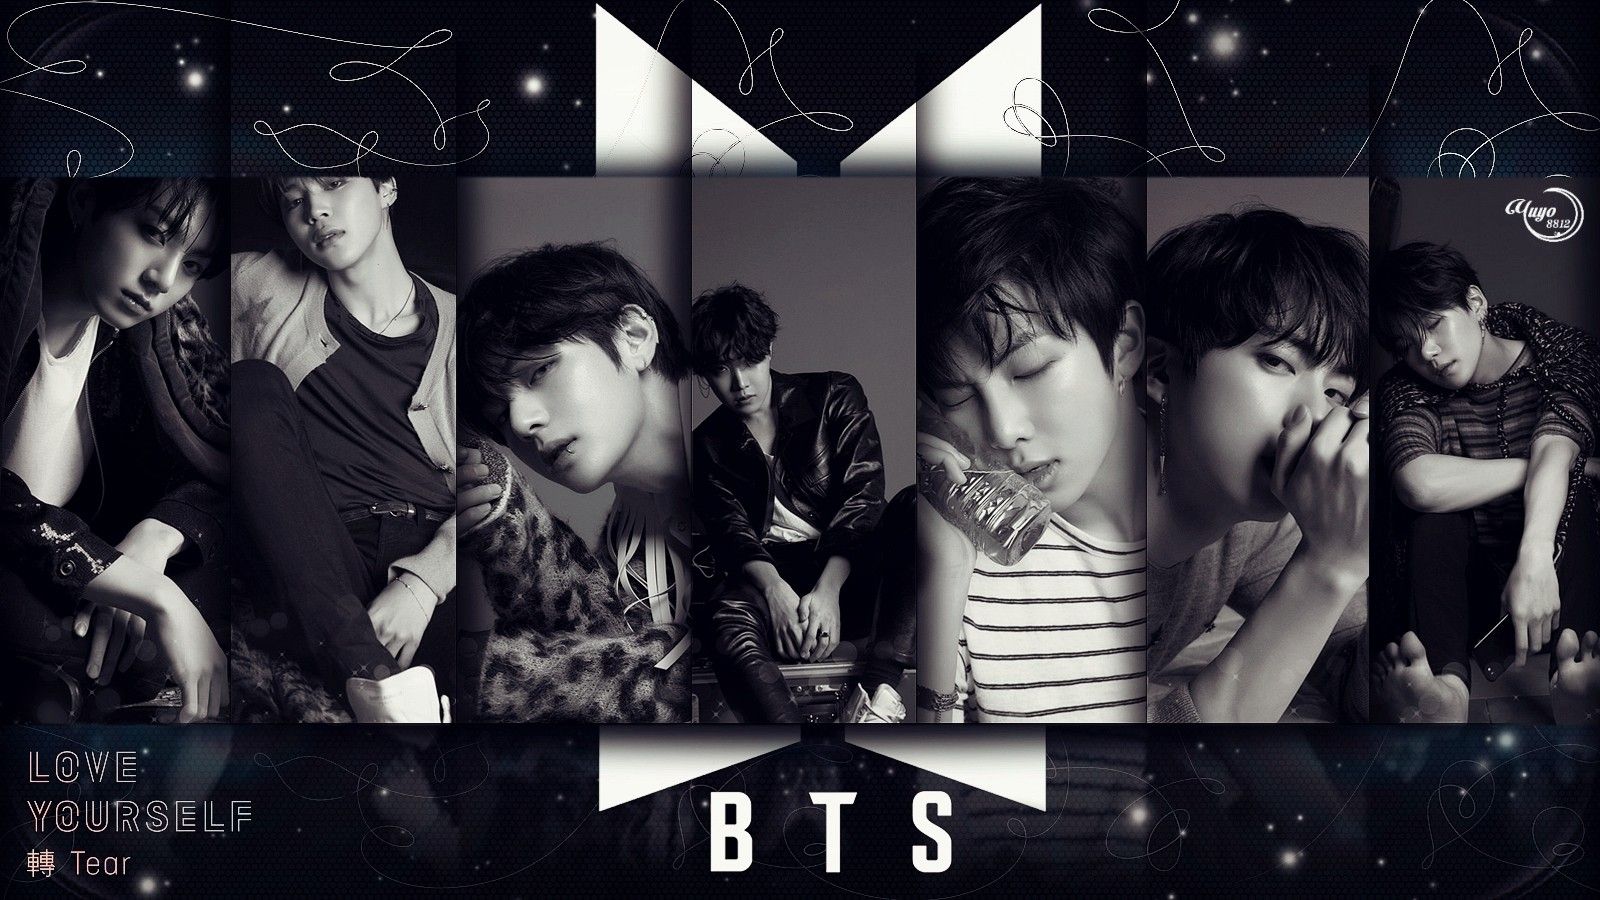 Love Yourself Tear BTS Wallpapers on WallpaperDog